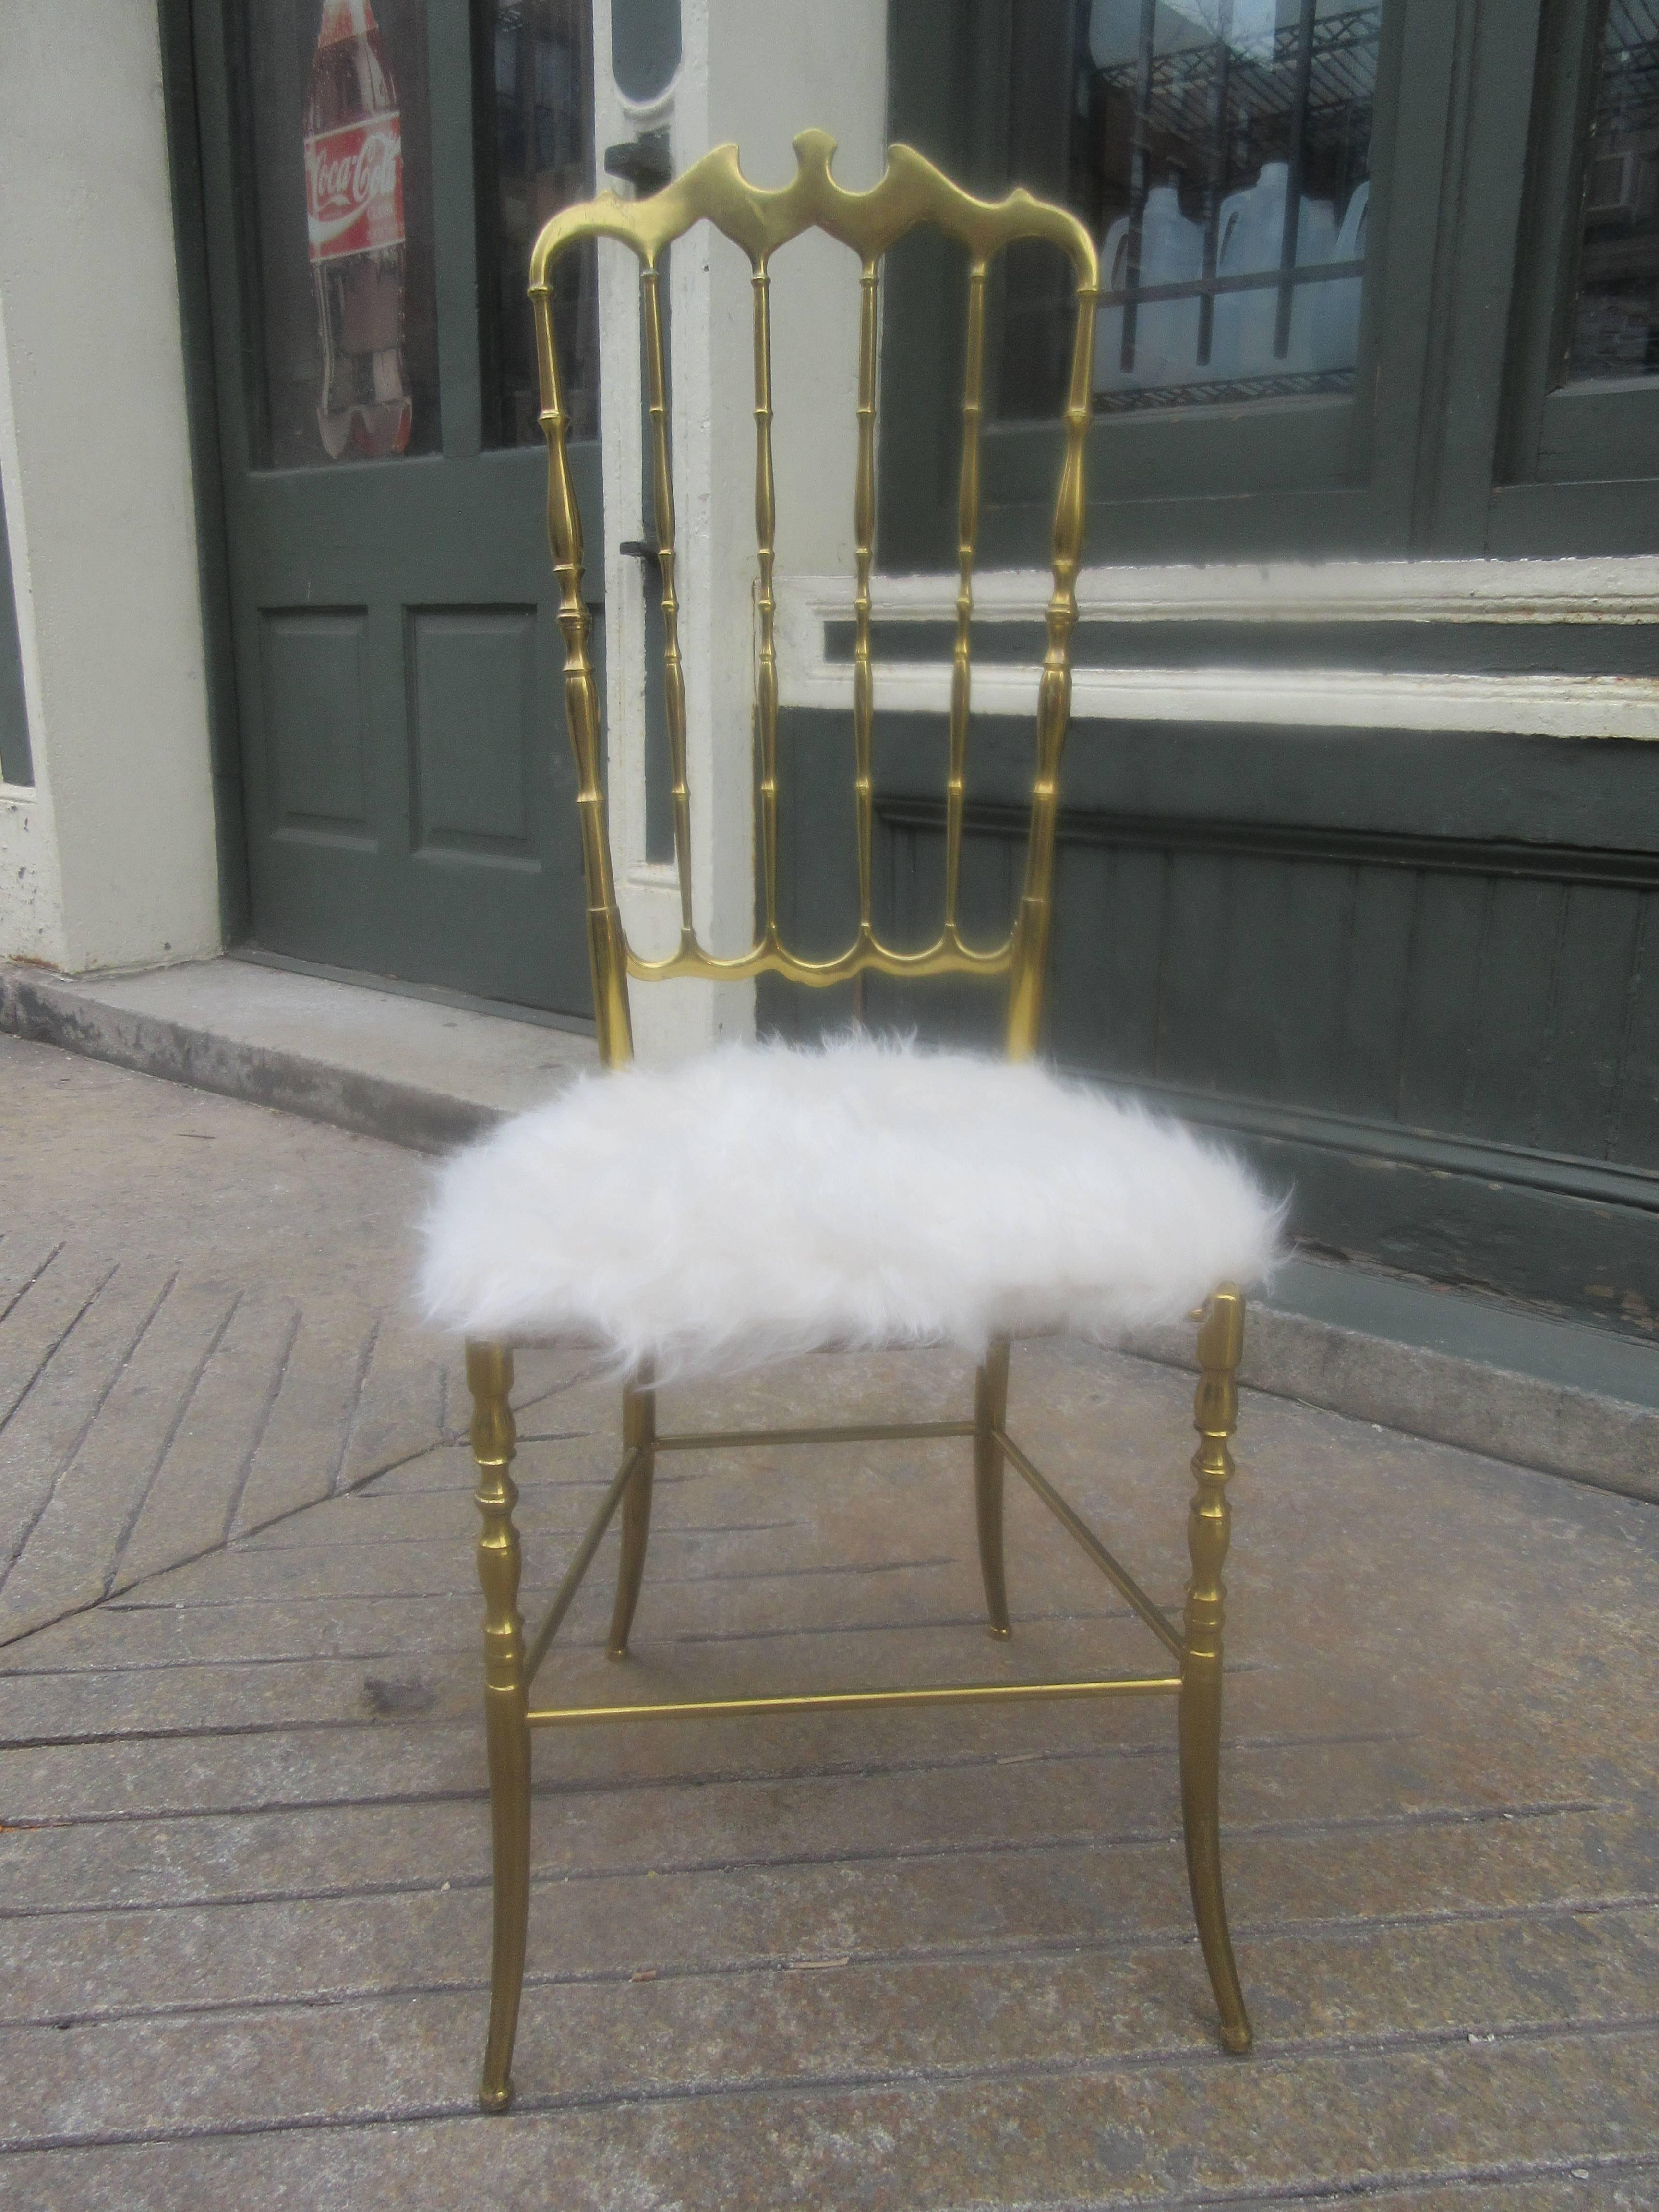 The Italian company Chiavaro made this chair in solid brass. We have upholstered it in an acrylic fur making it a perfect boudoir chair. This chair is the high backed version.